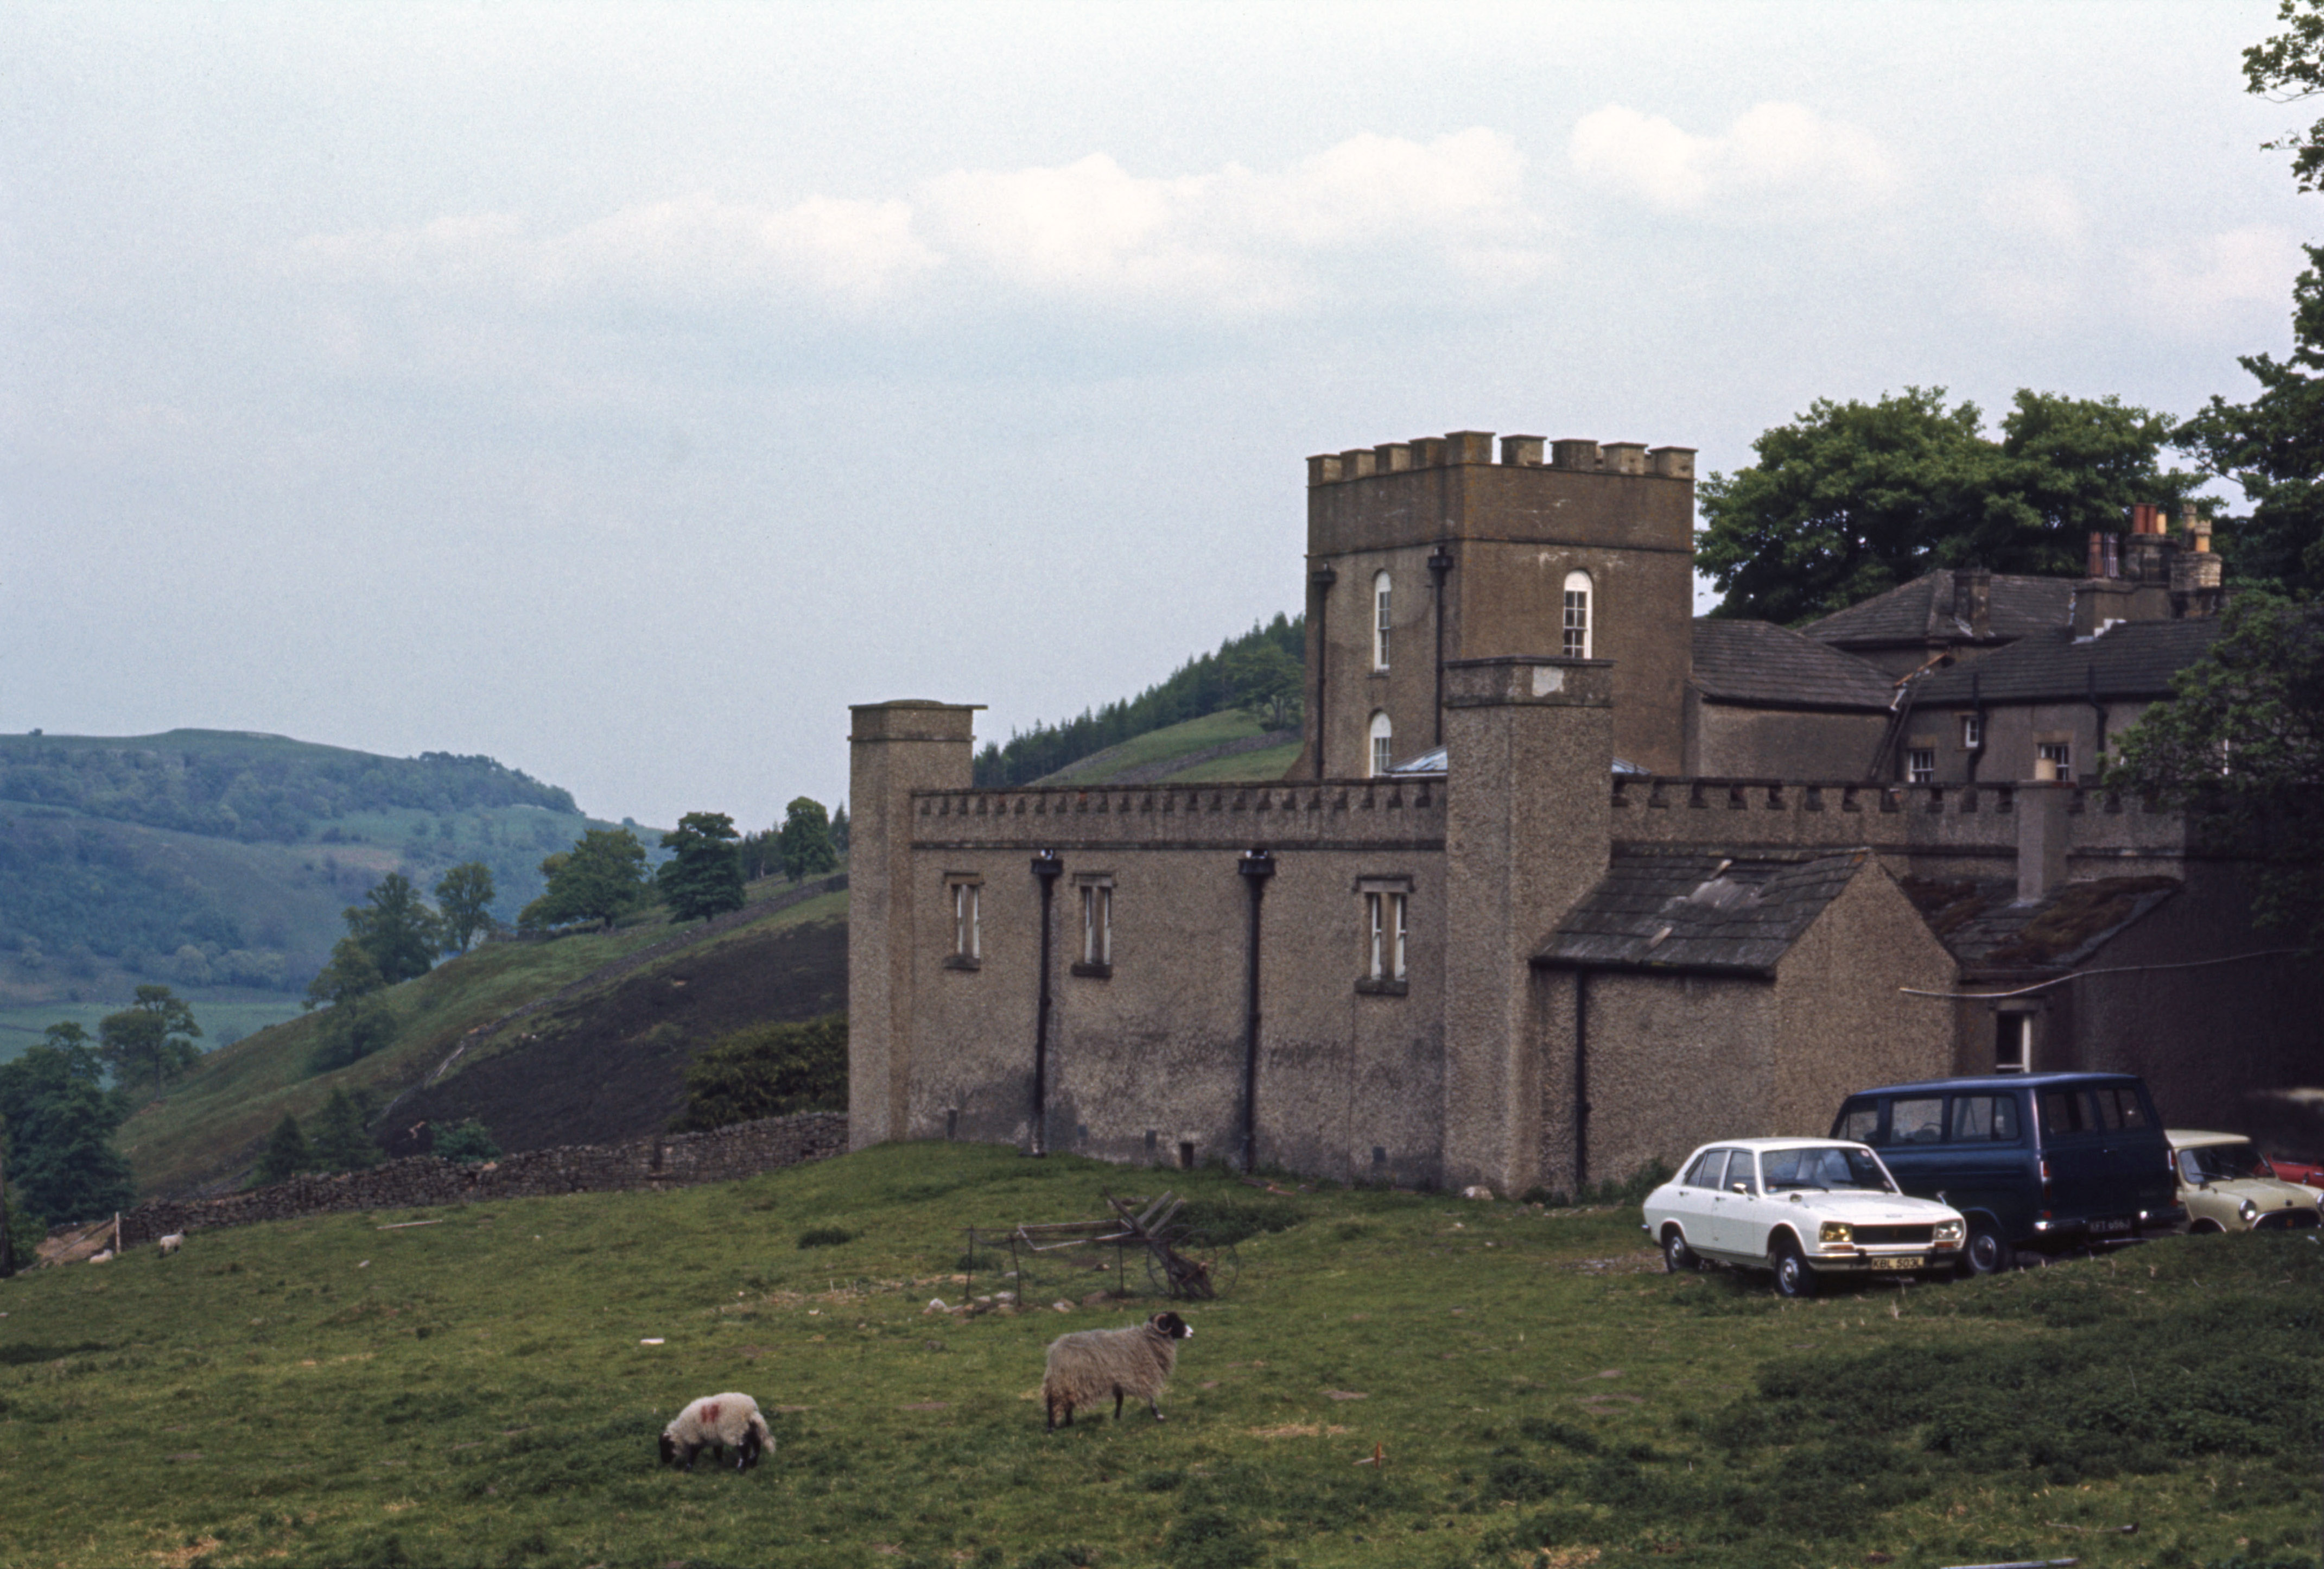 7404022 28 May 1974 - Grinton Lodge Youth Hostel. Our white Peugeot is in the car park.